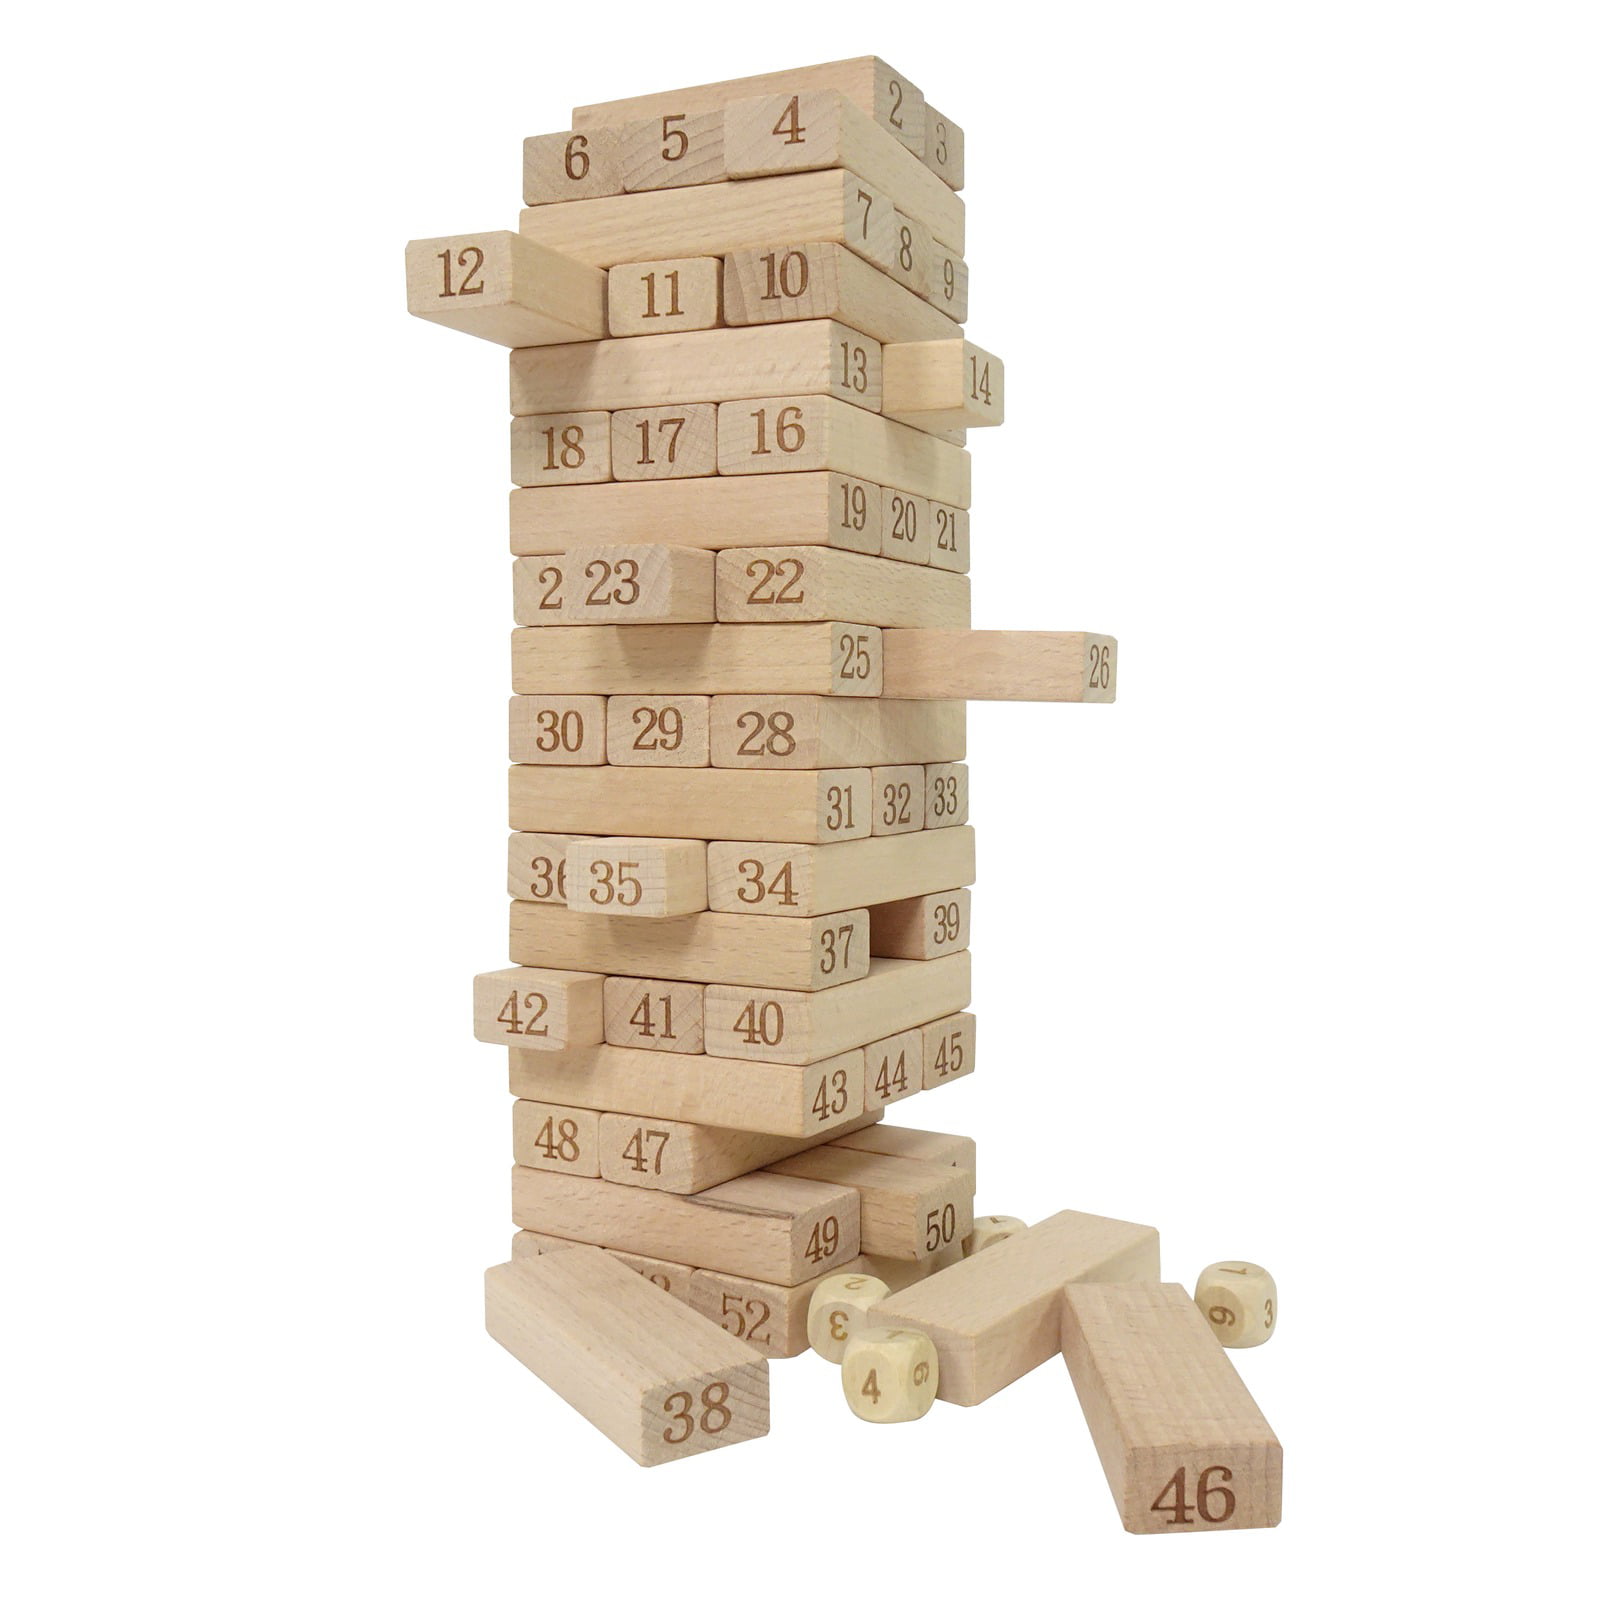 Timber Tower Wood Block Stacking Game Original Edition 48 Pieces Three Blocks for sale online